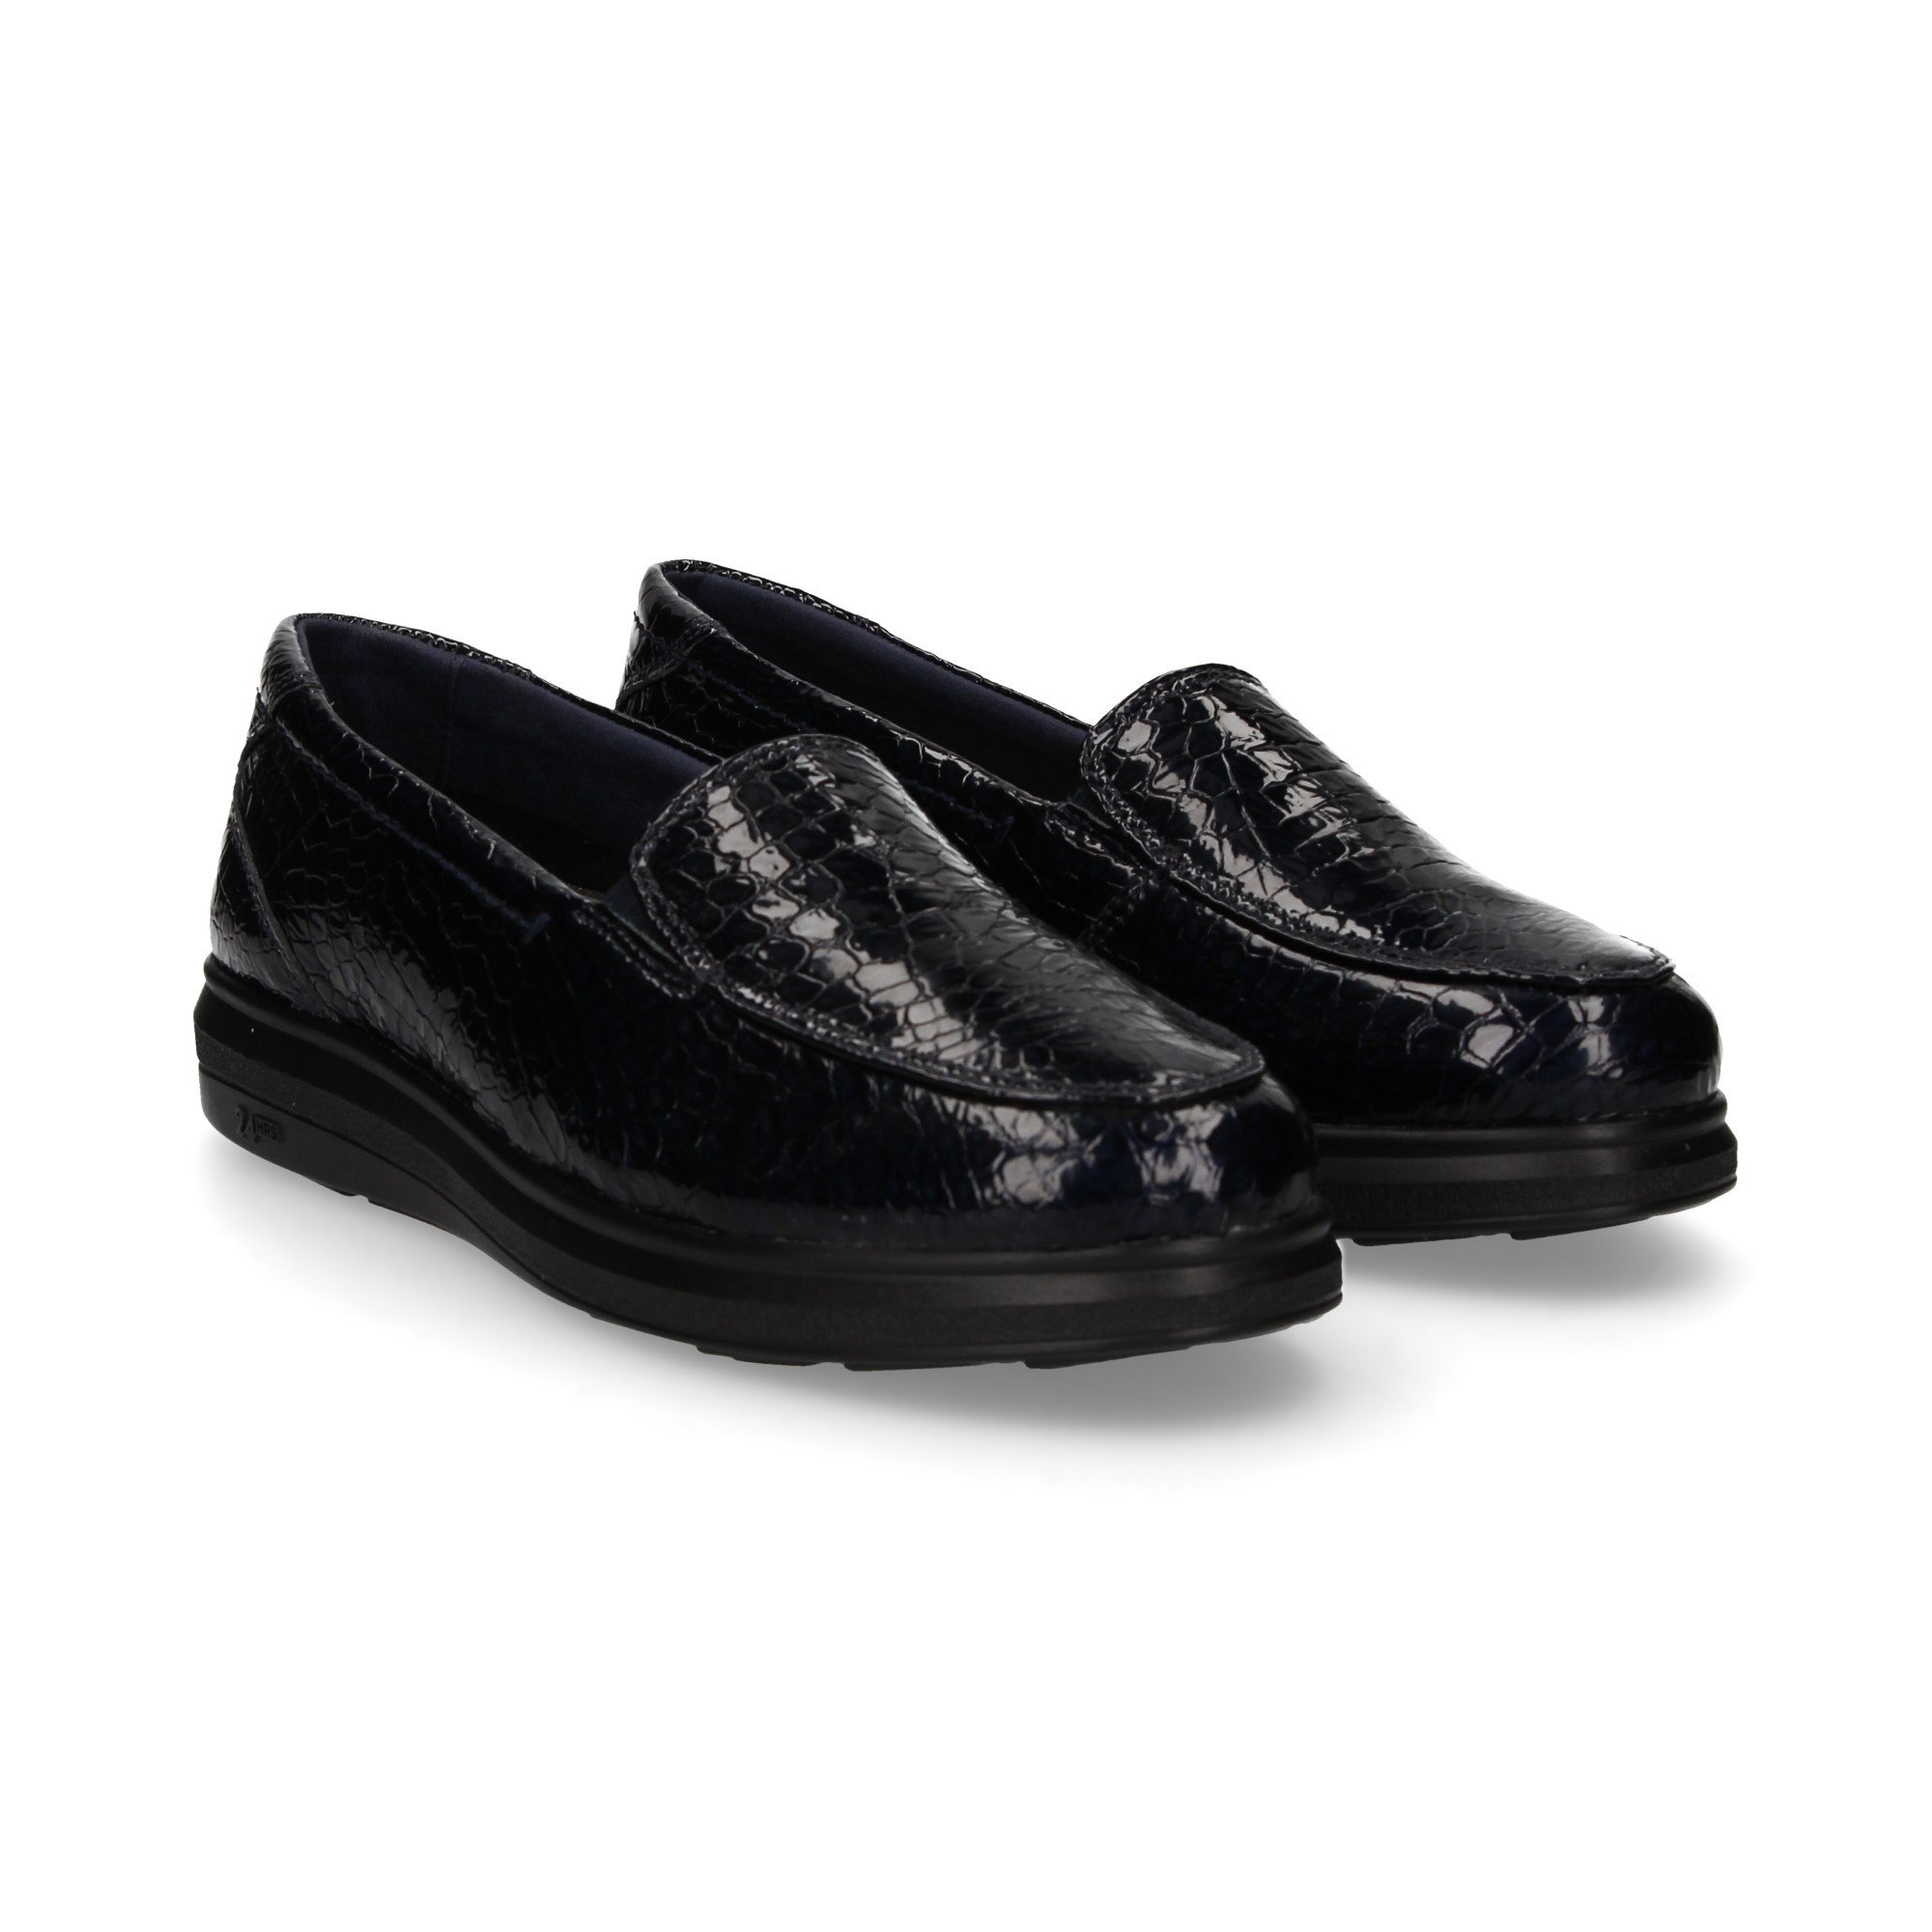 moccasin-elast-patent-leather-sides-coco-blue